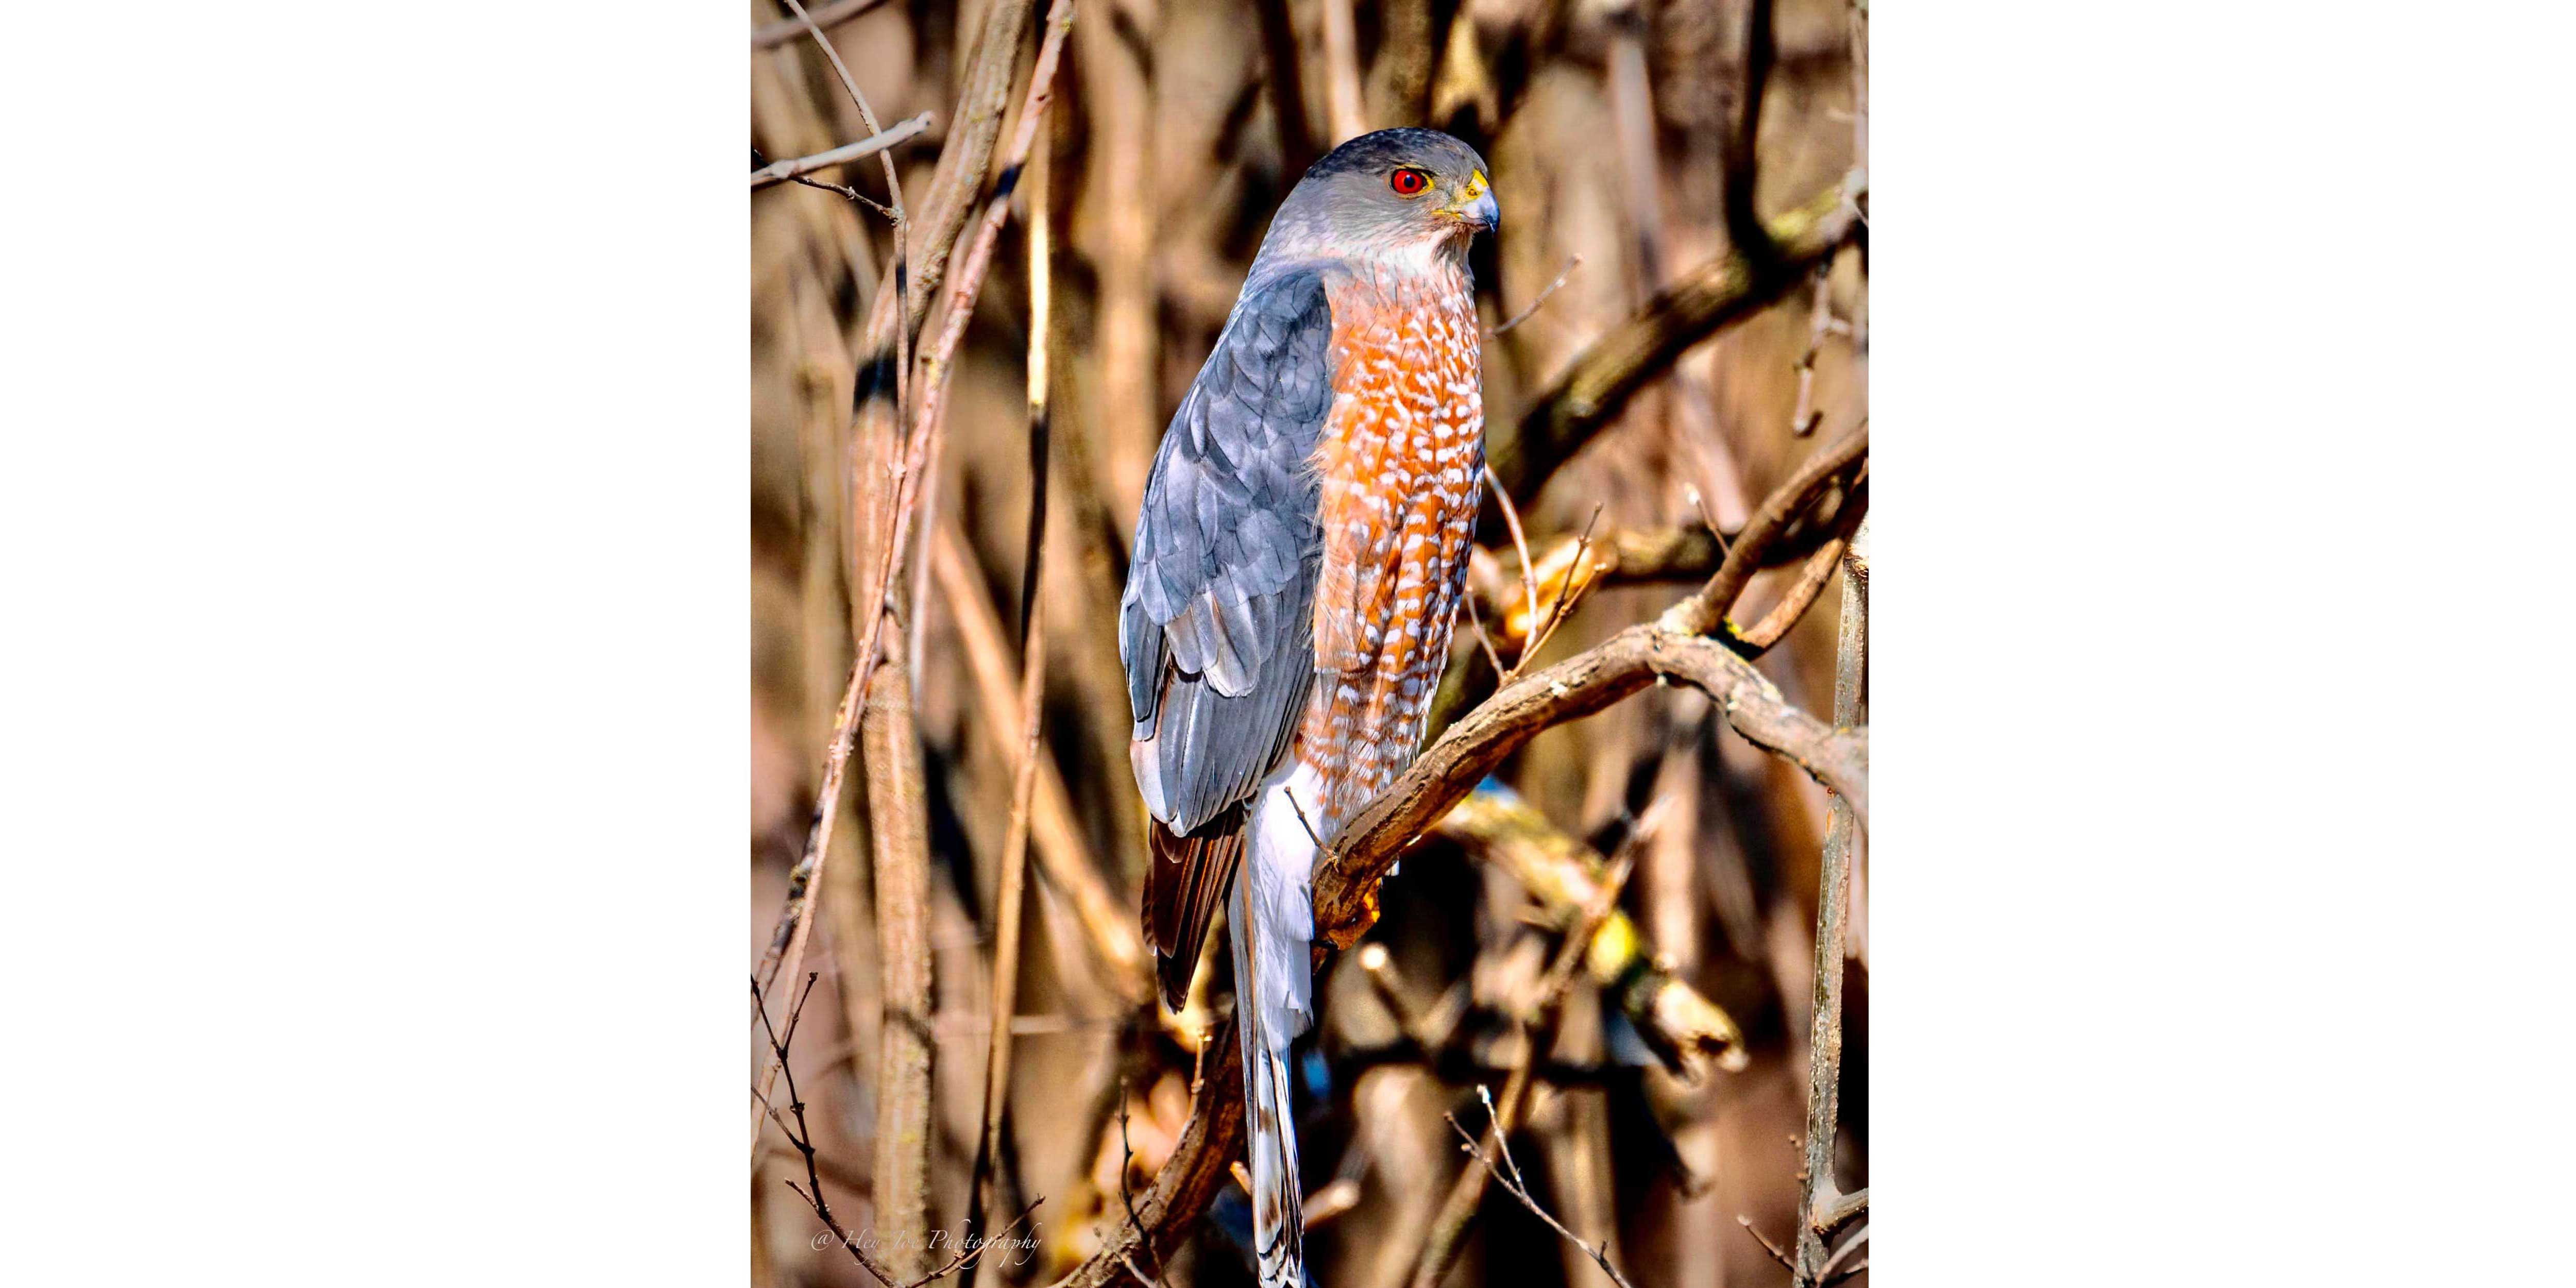 Cooper's hawk on a branch